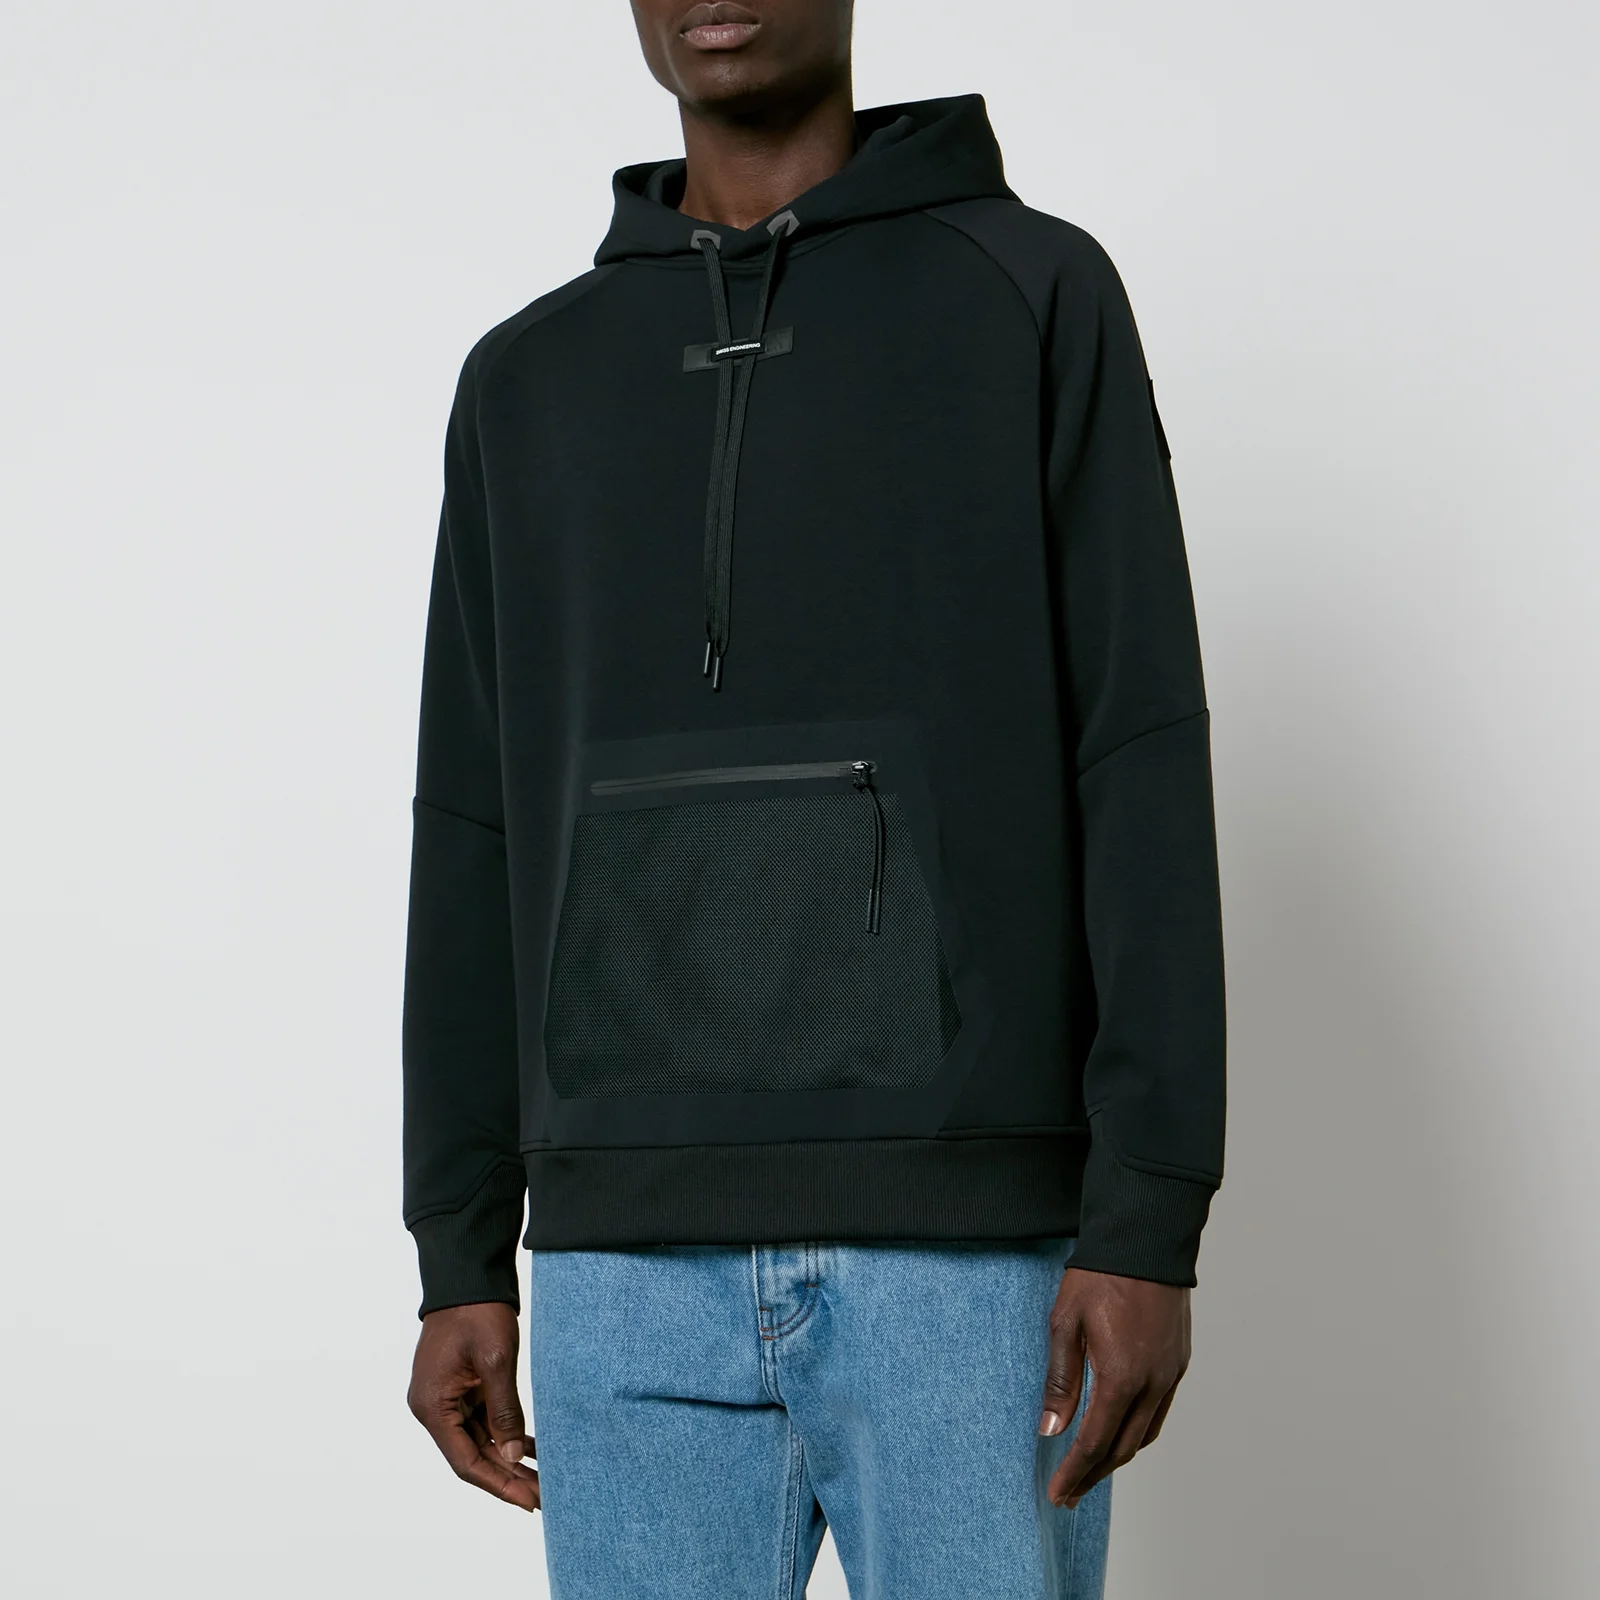 ON Stretch Jersey Hoodie - M Image 1